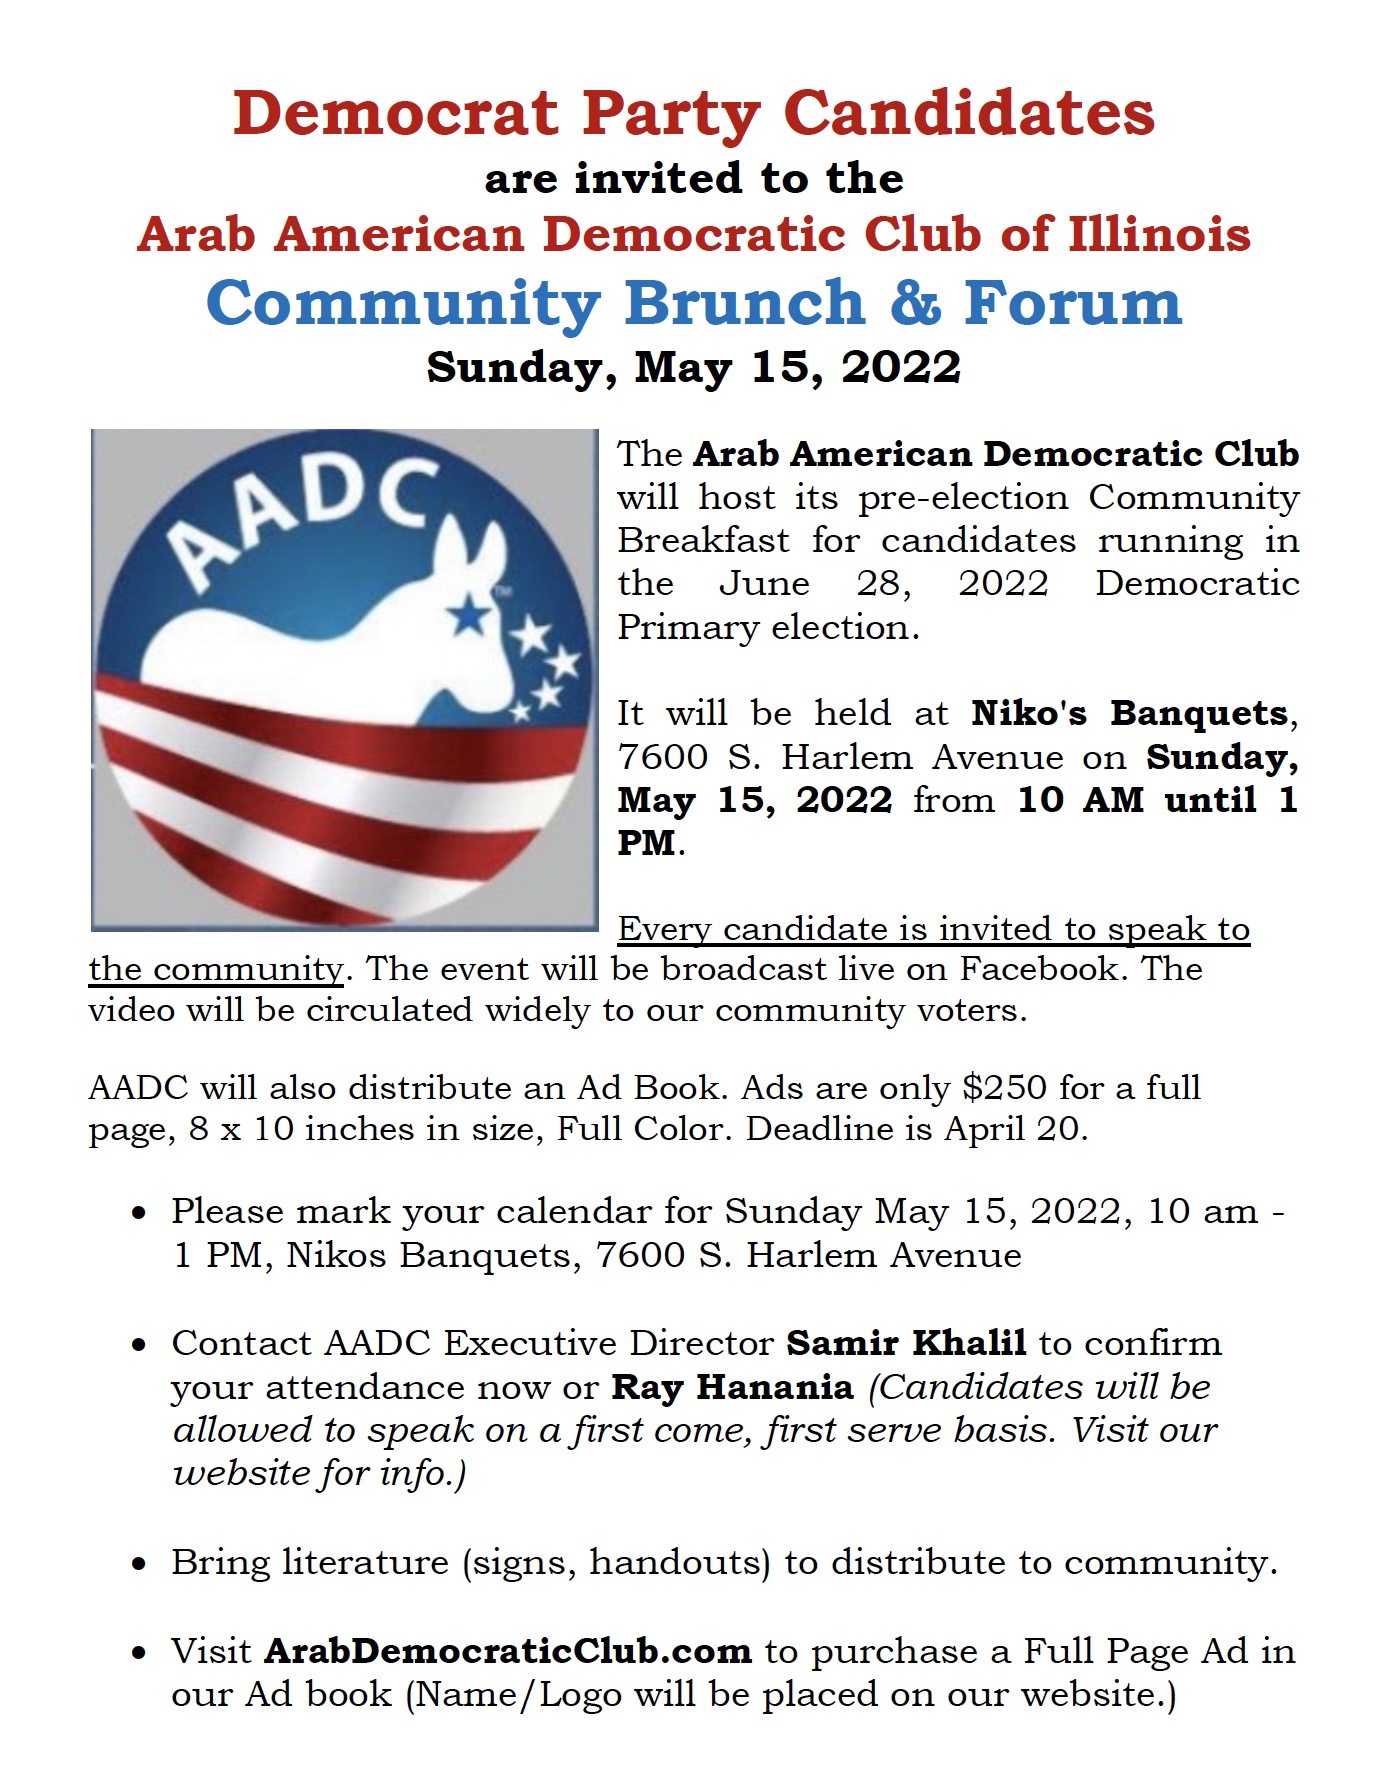 AADC May 15, 2022 Candidates Brunch & Forum, Nikos Banquets. Candidate's Flyer